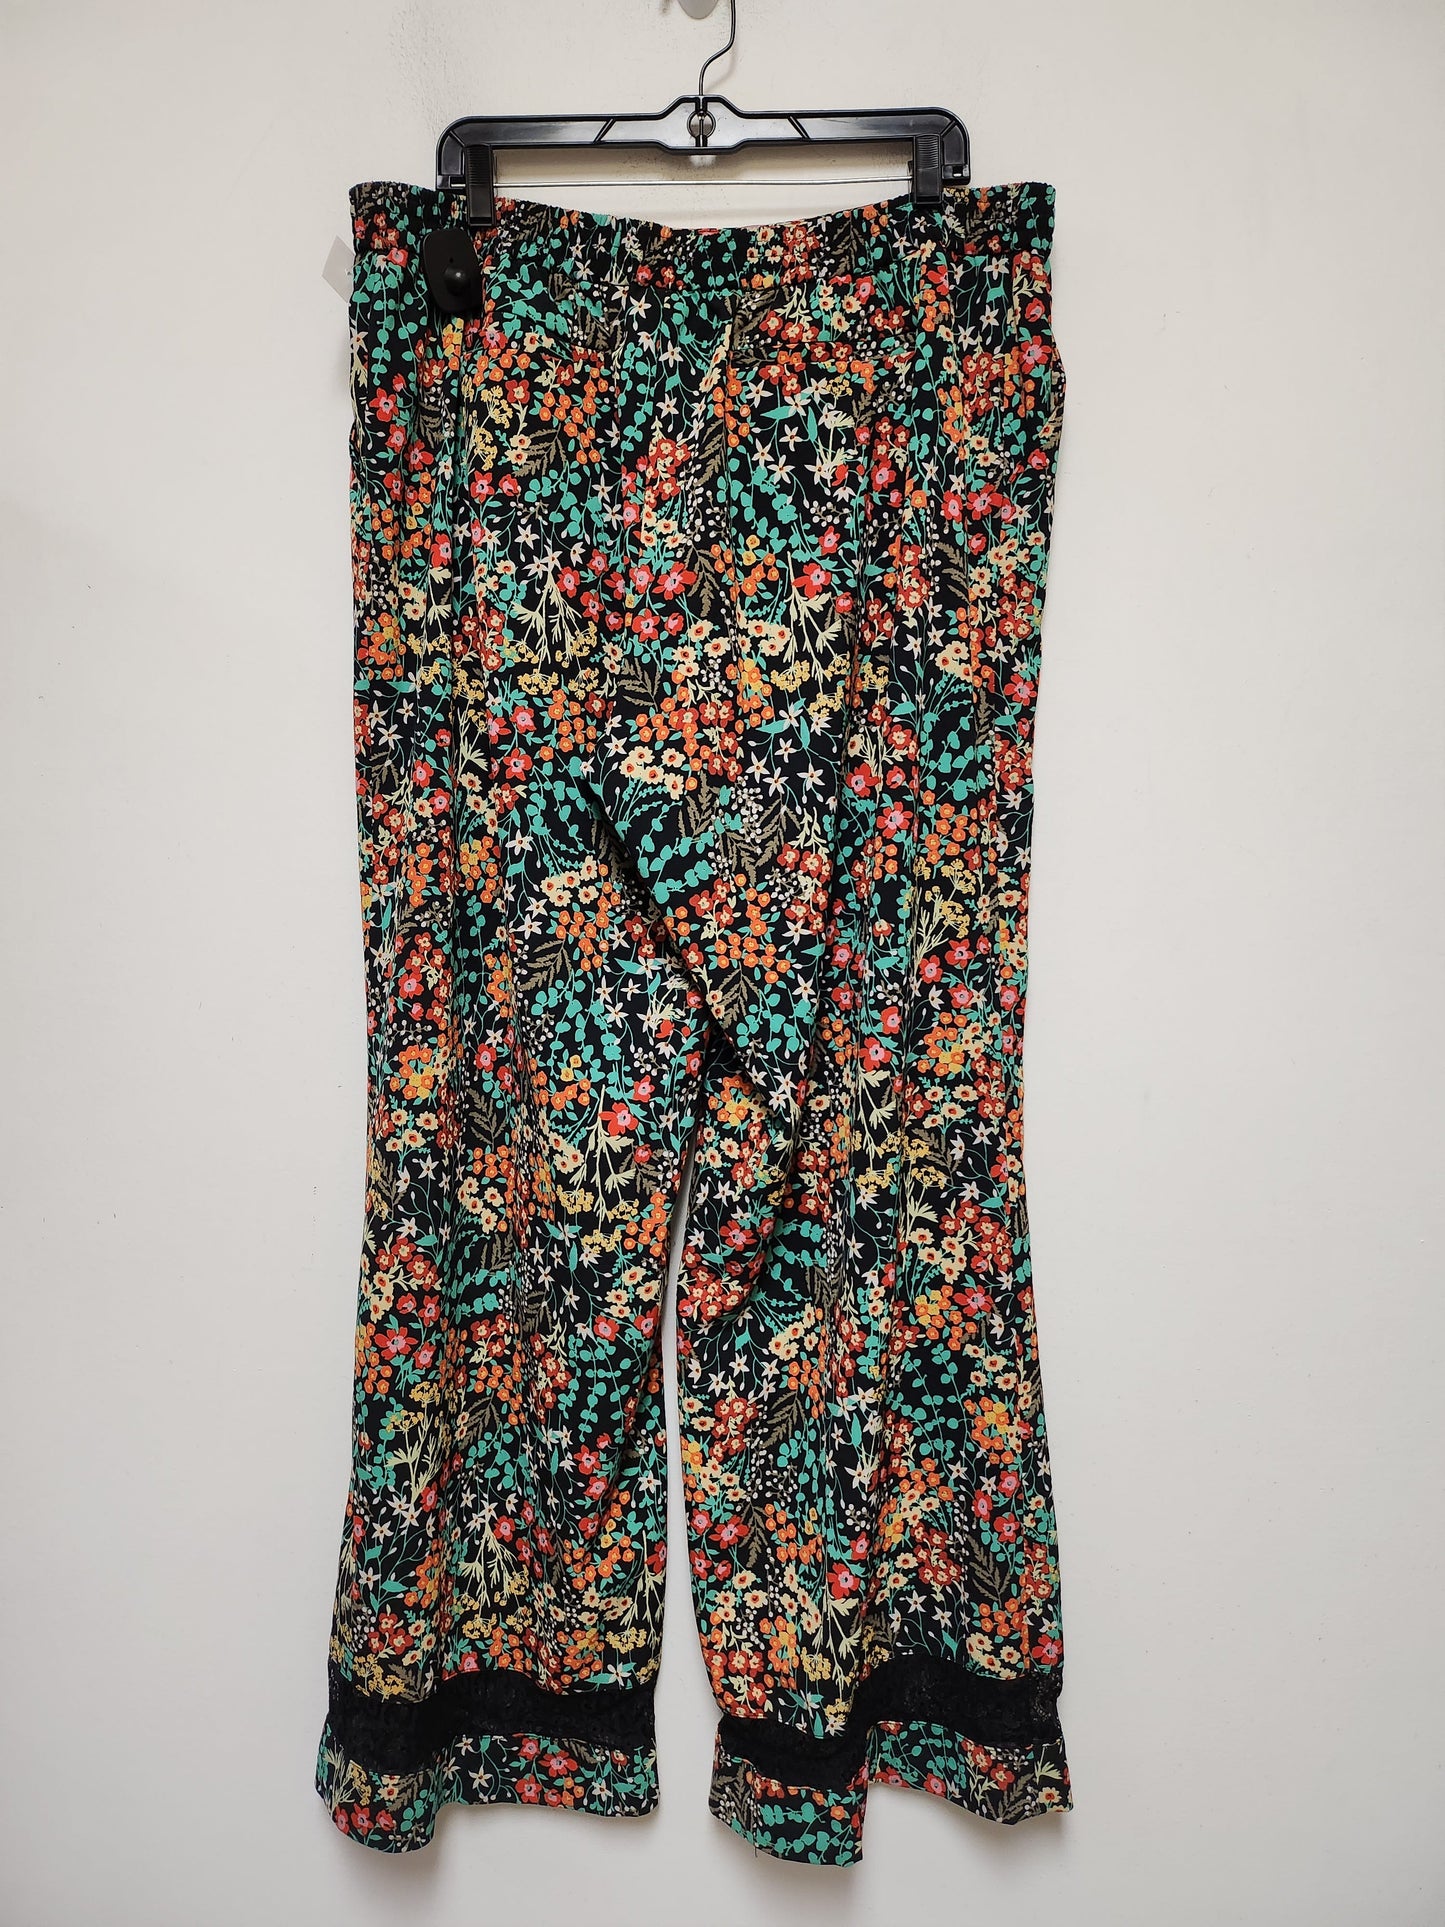 Floral Print Pants Wide Leg New York And Co, Size 16